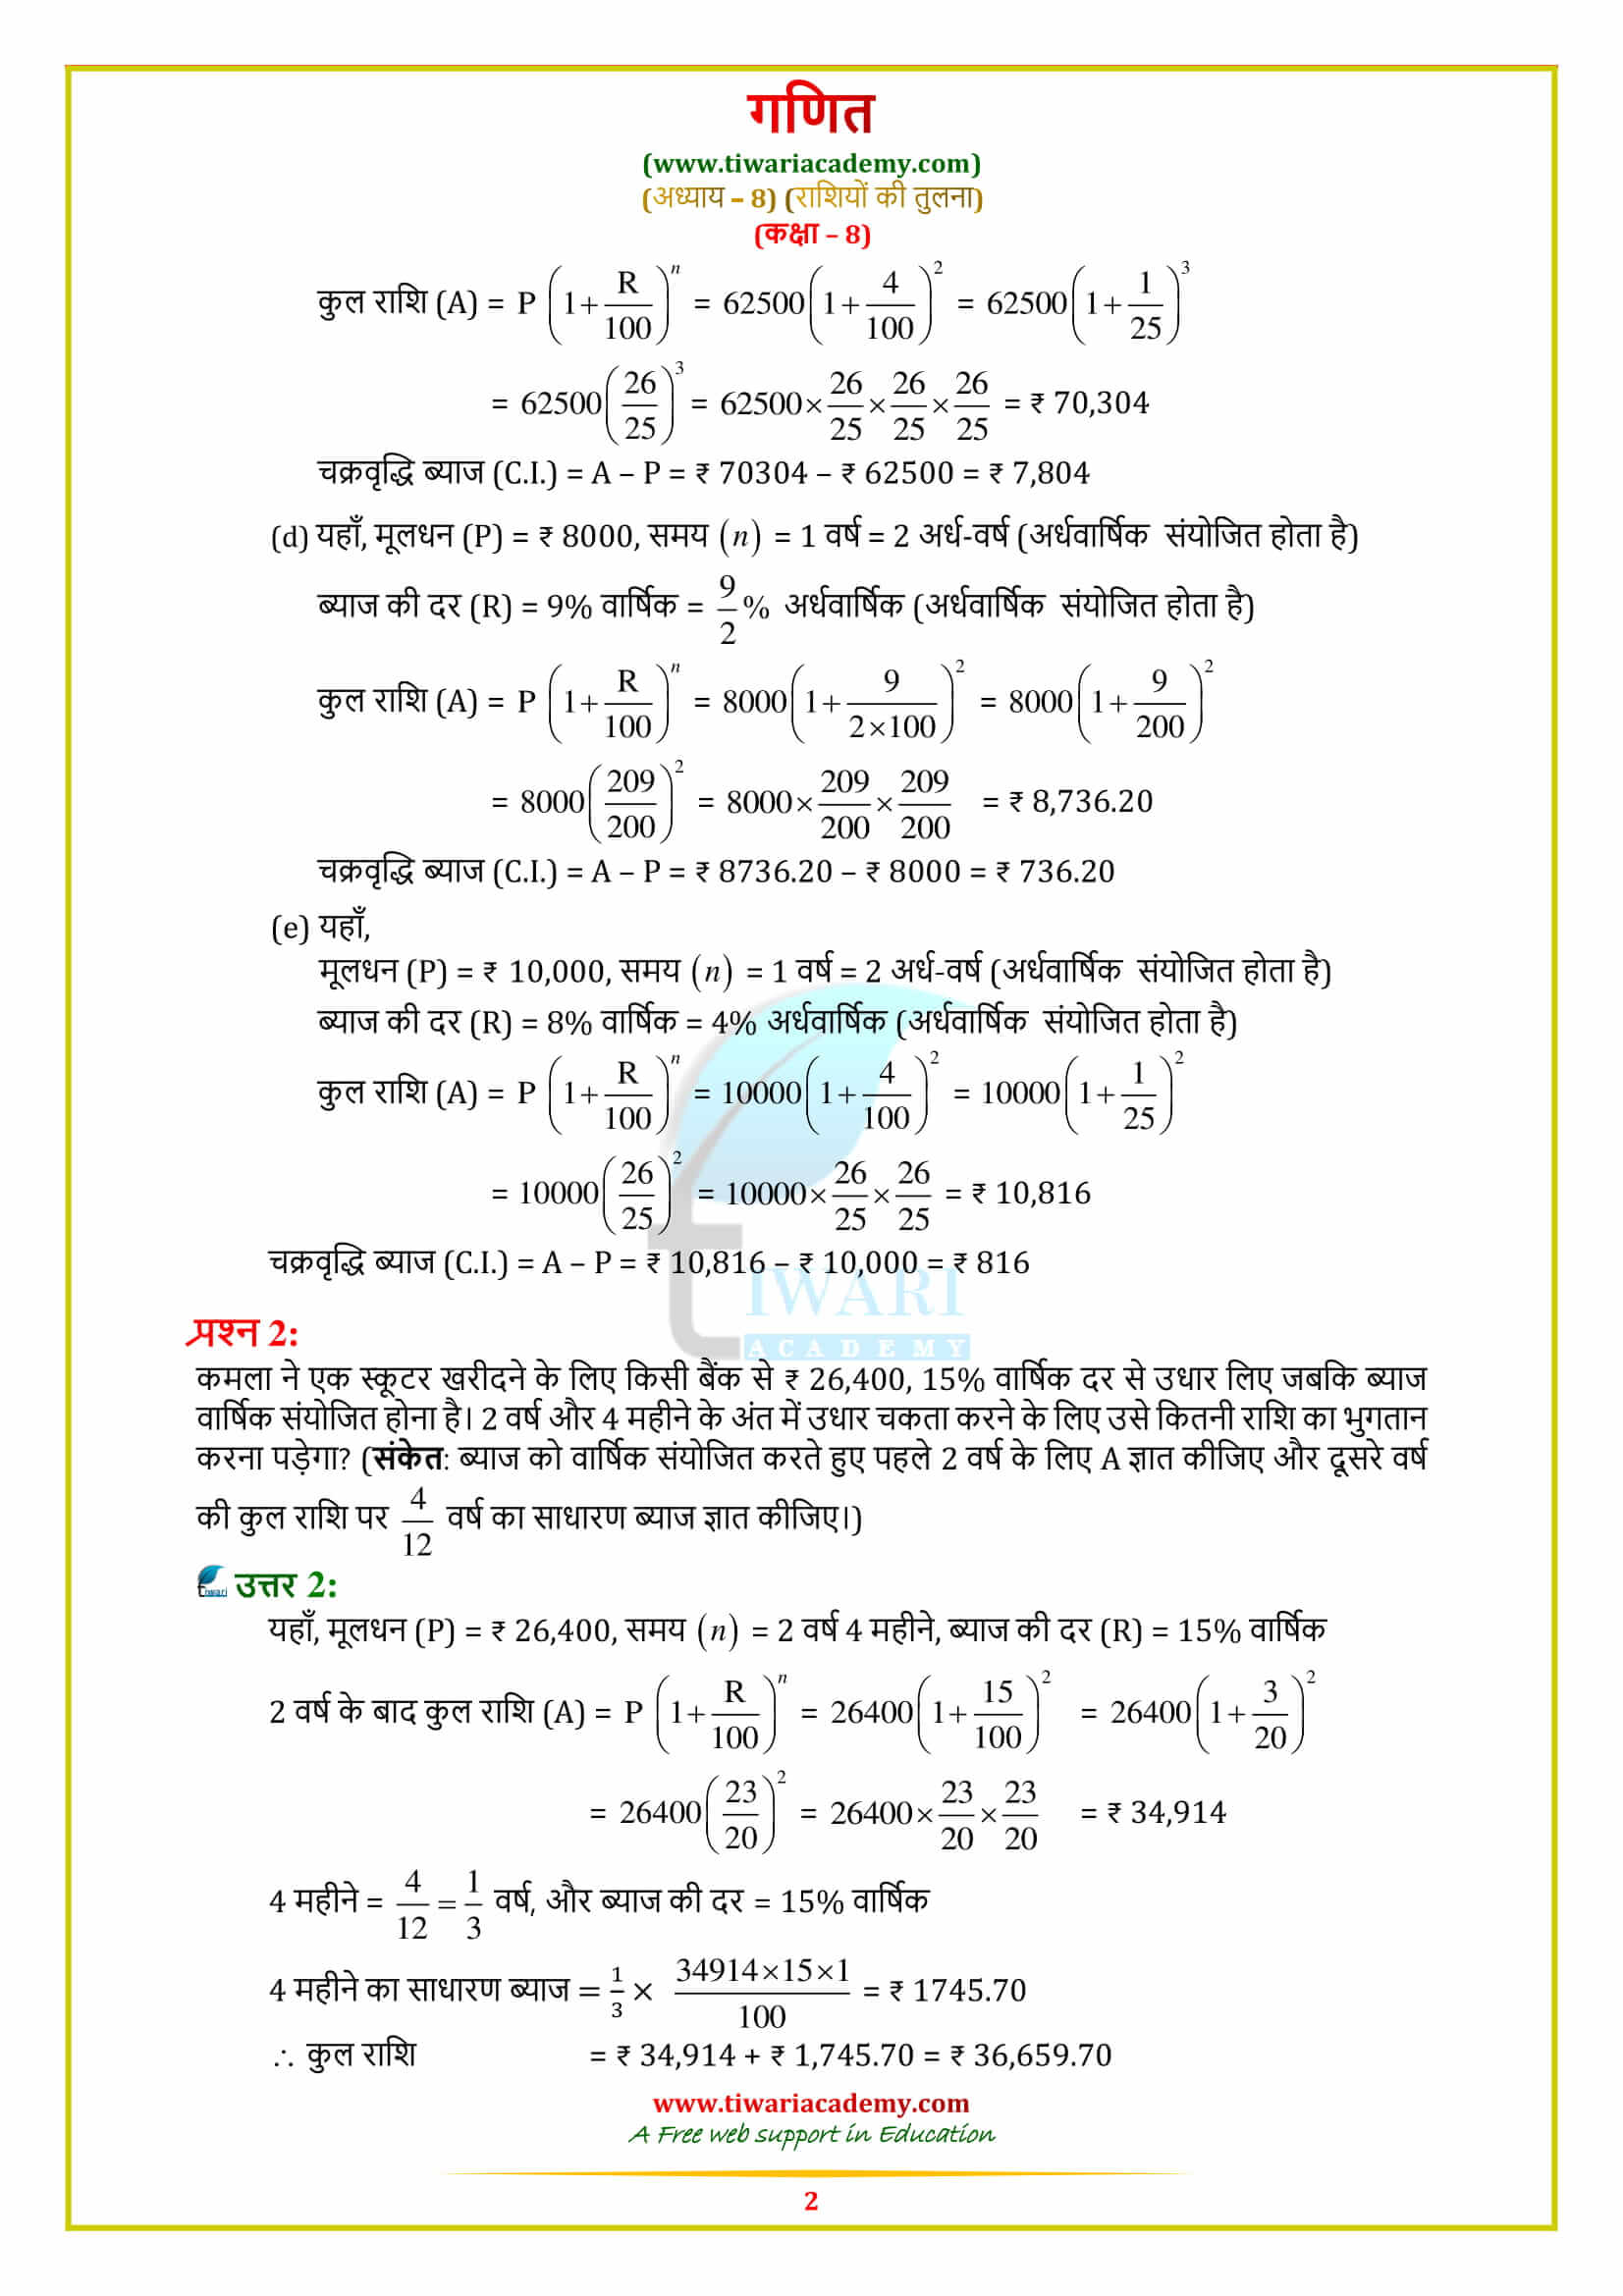 8 Maths Exercise 8.3 Solutions in pdf form